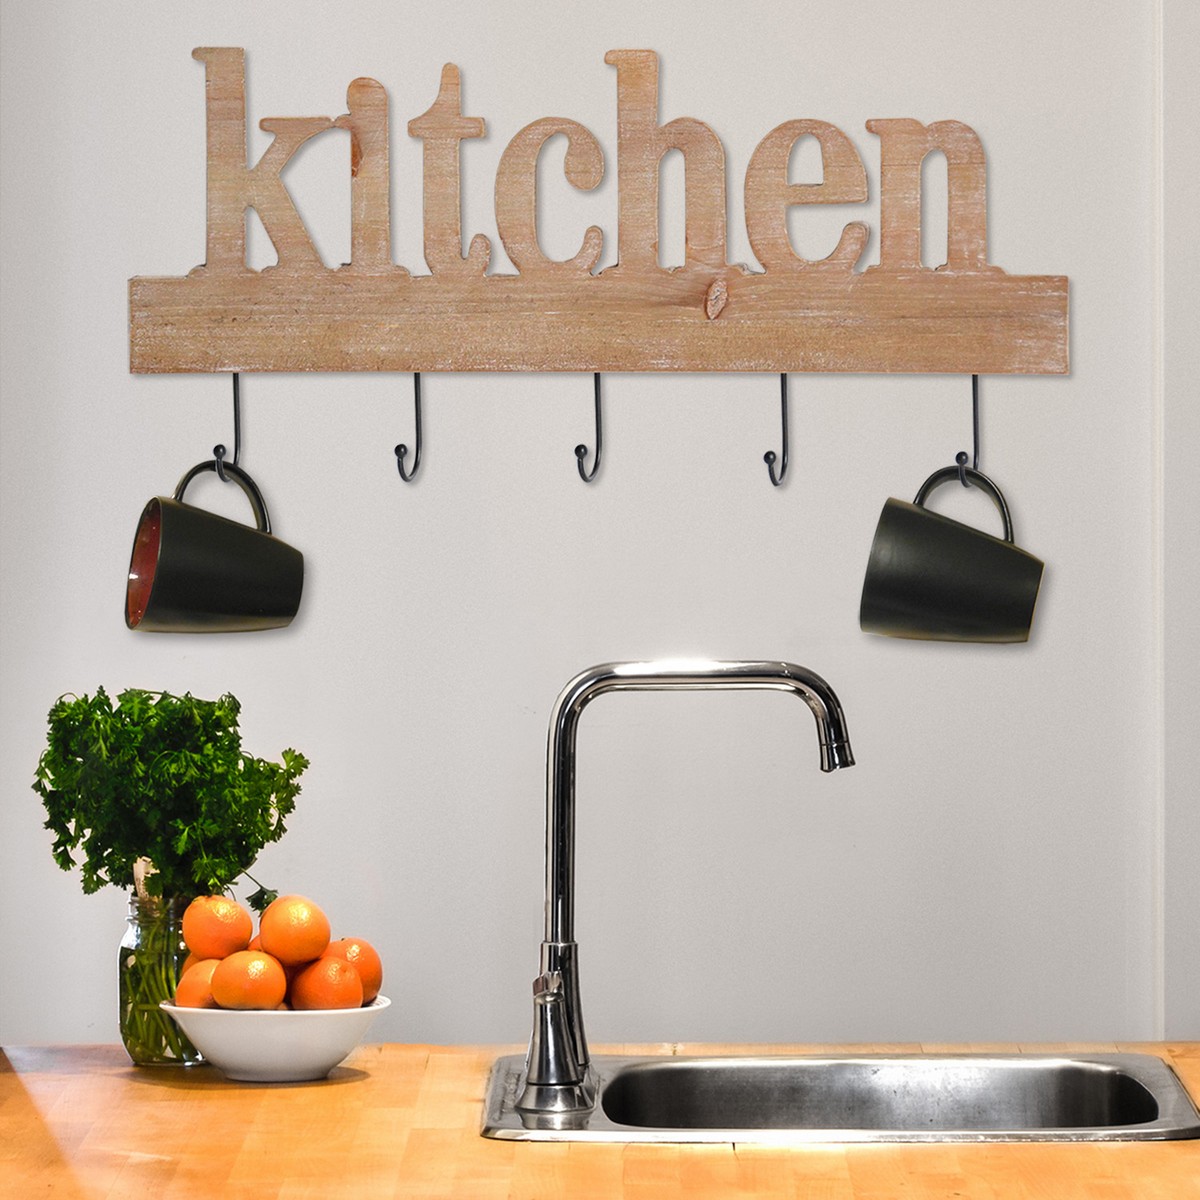 Stratton Home Decor Kitchen Typography Wall Decor - Washed Wood